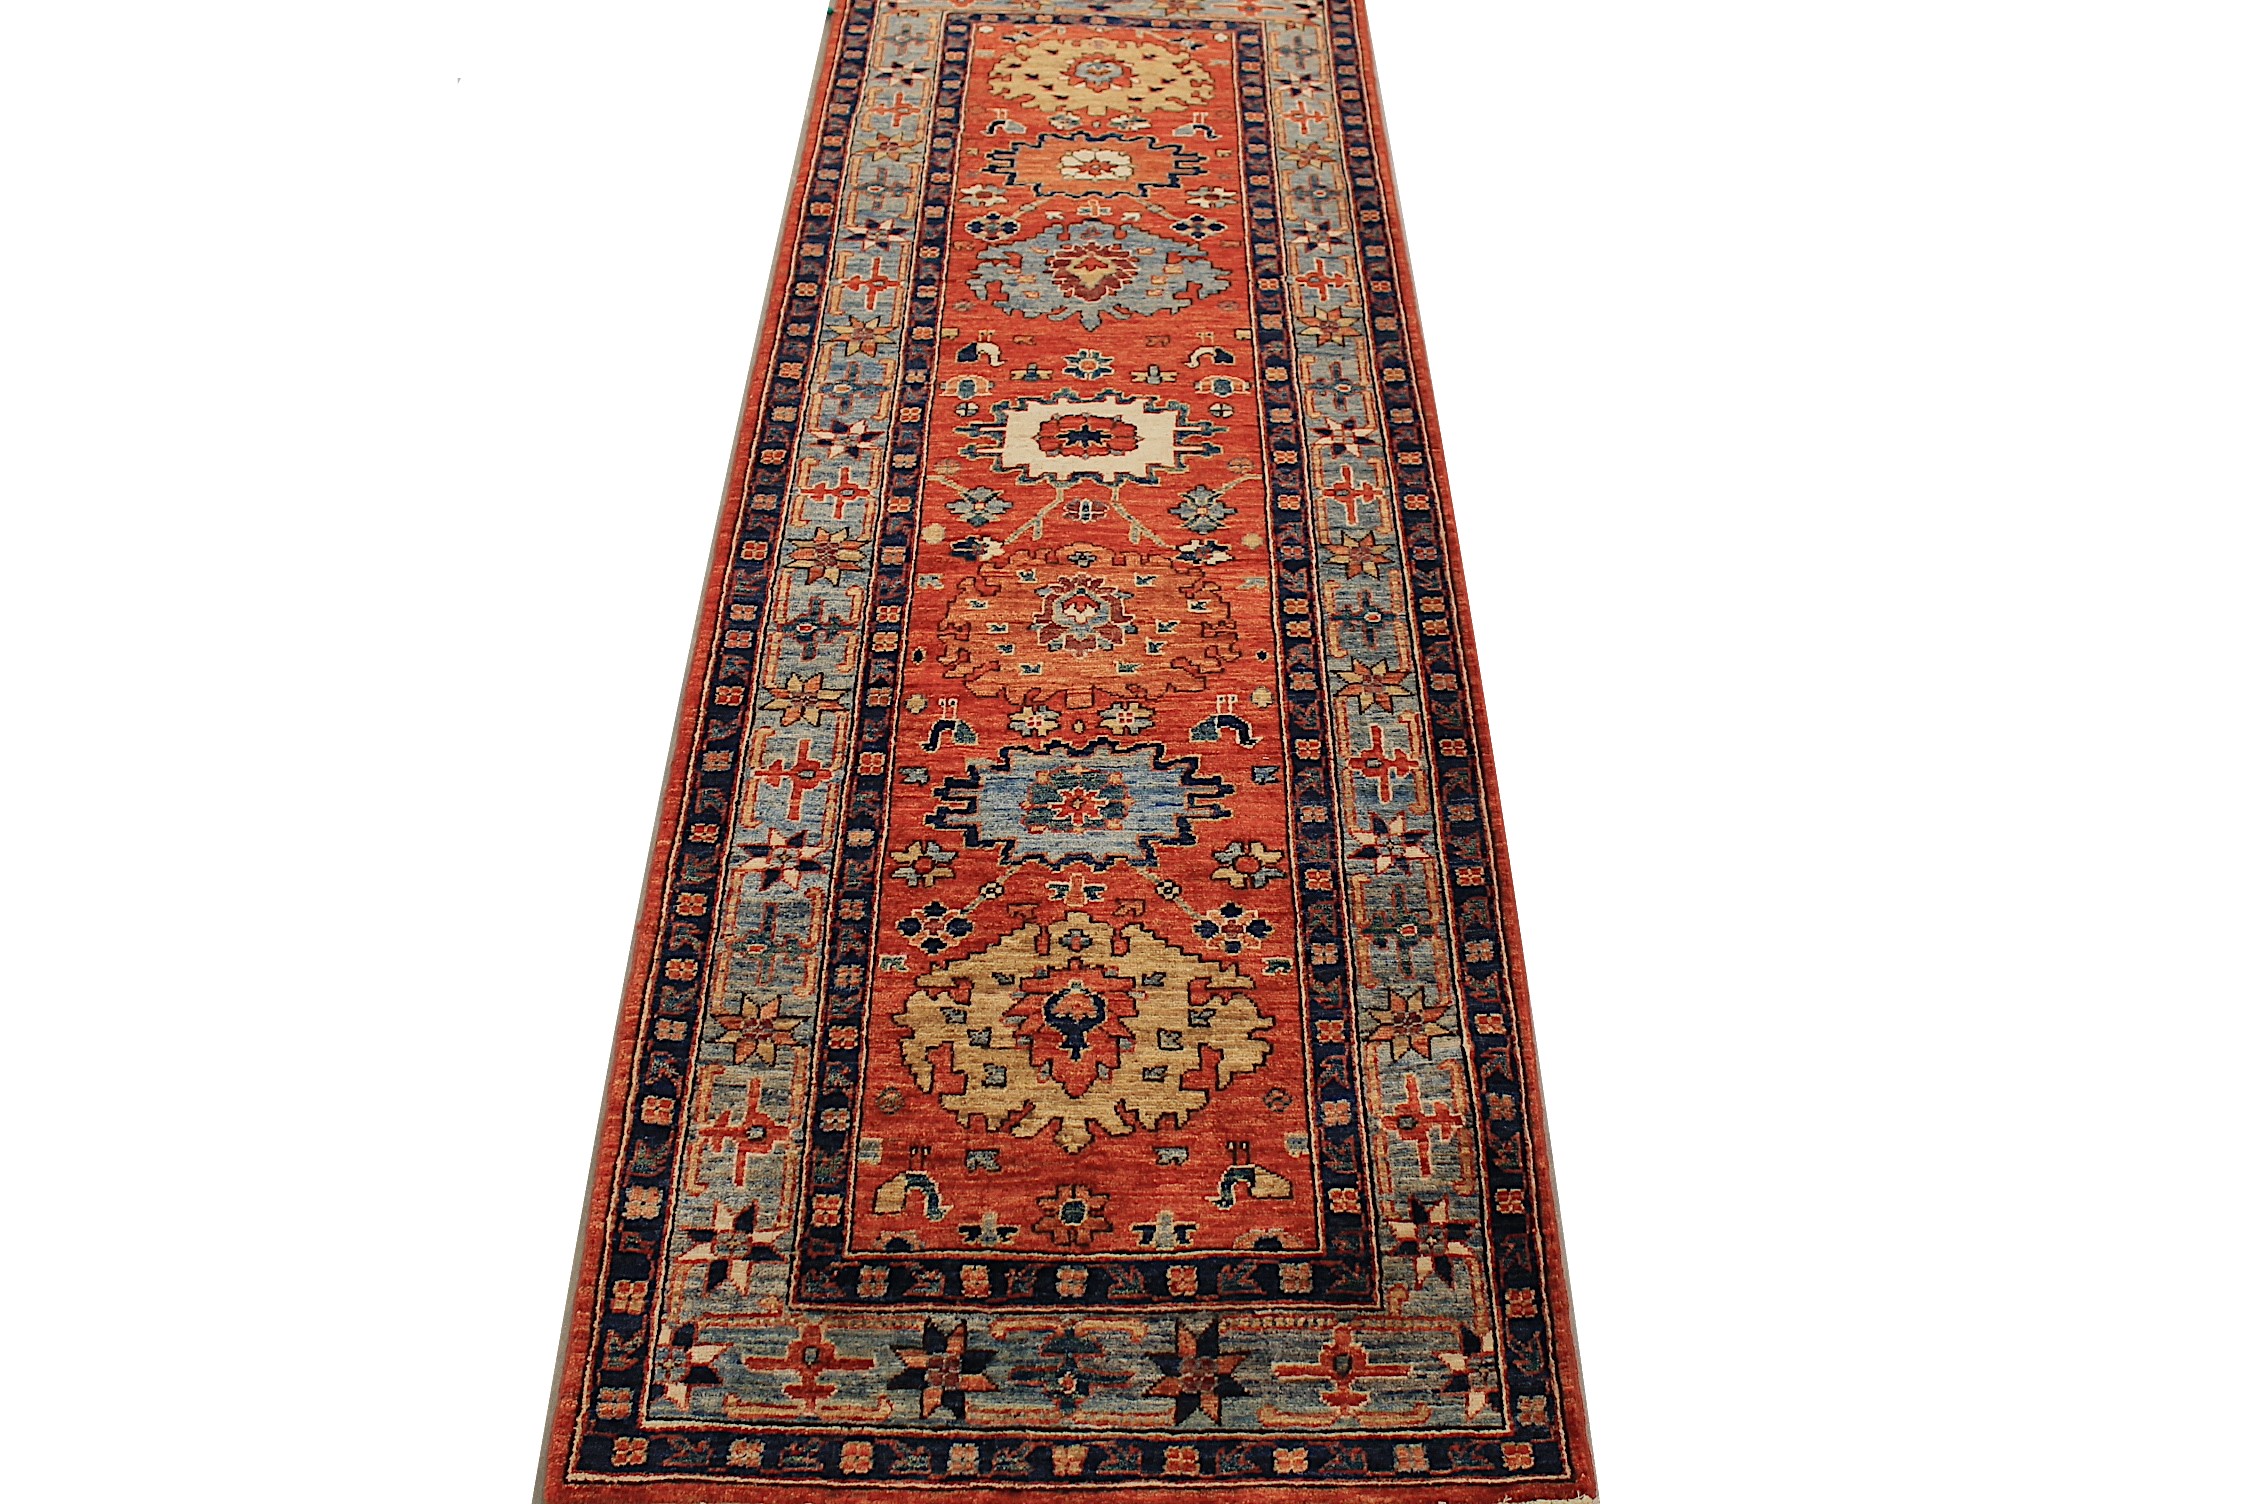 8 ft. Runner Aryana & Antique Revivals Hand Knotted Wool Area Rug - MR027836